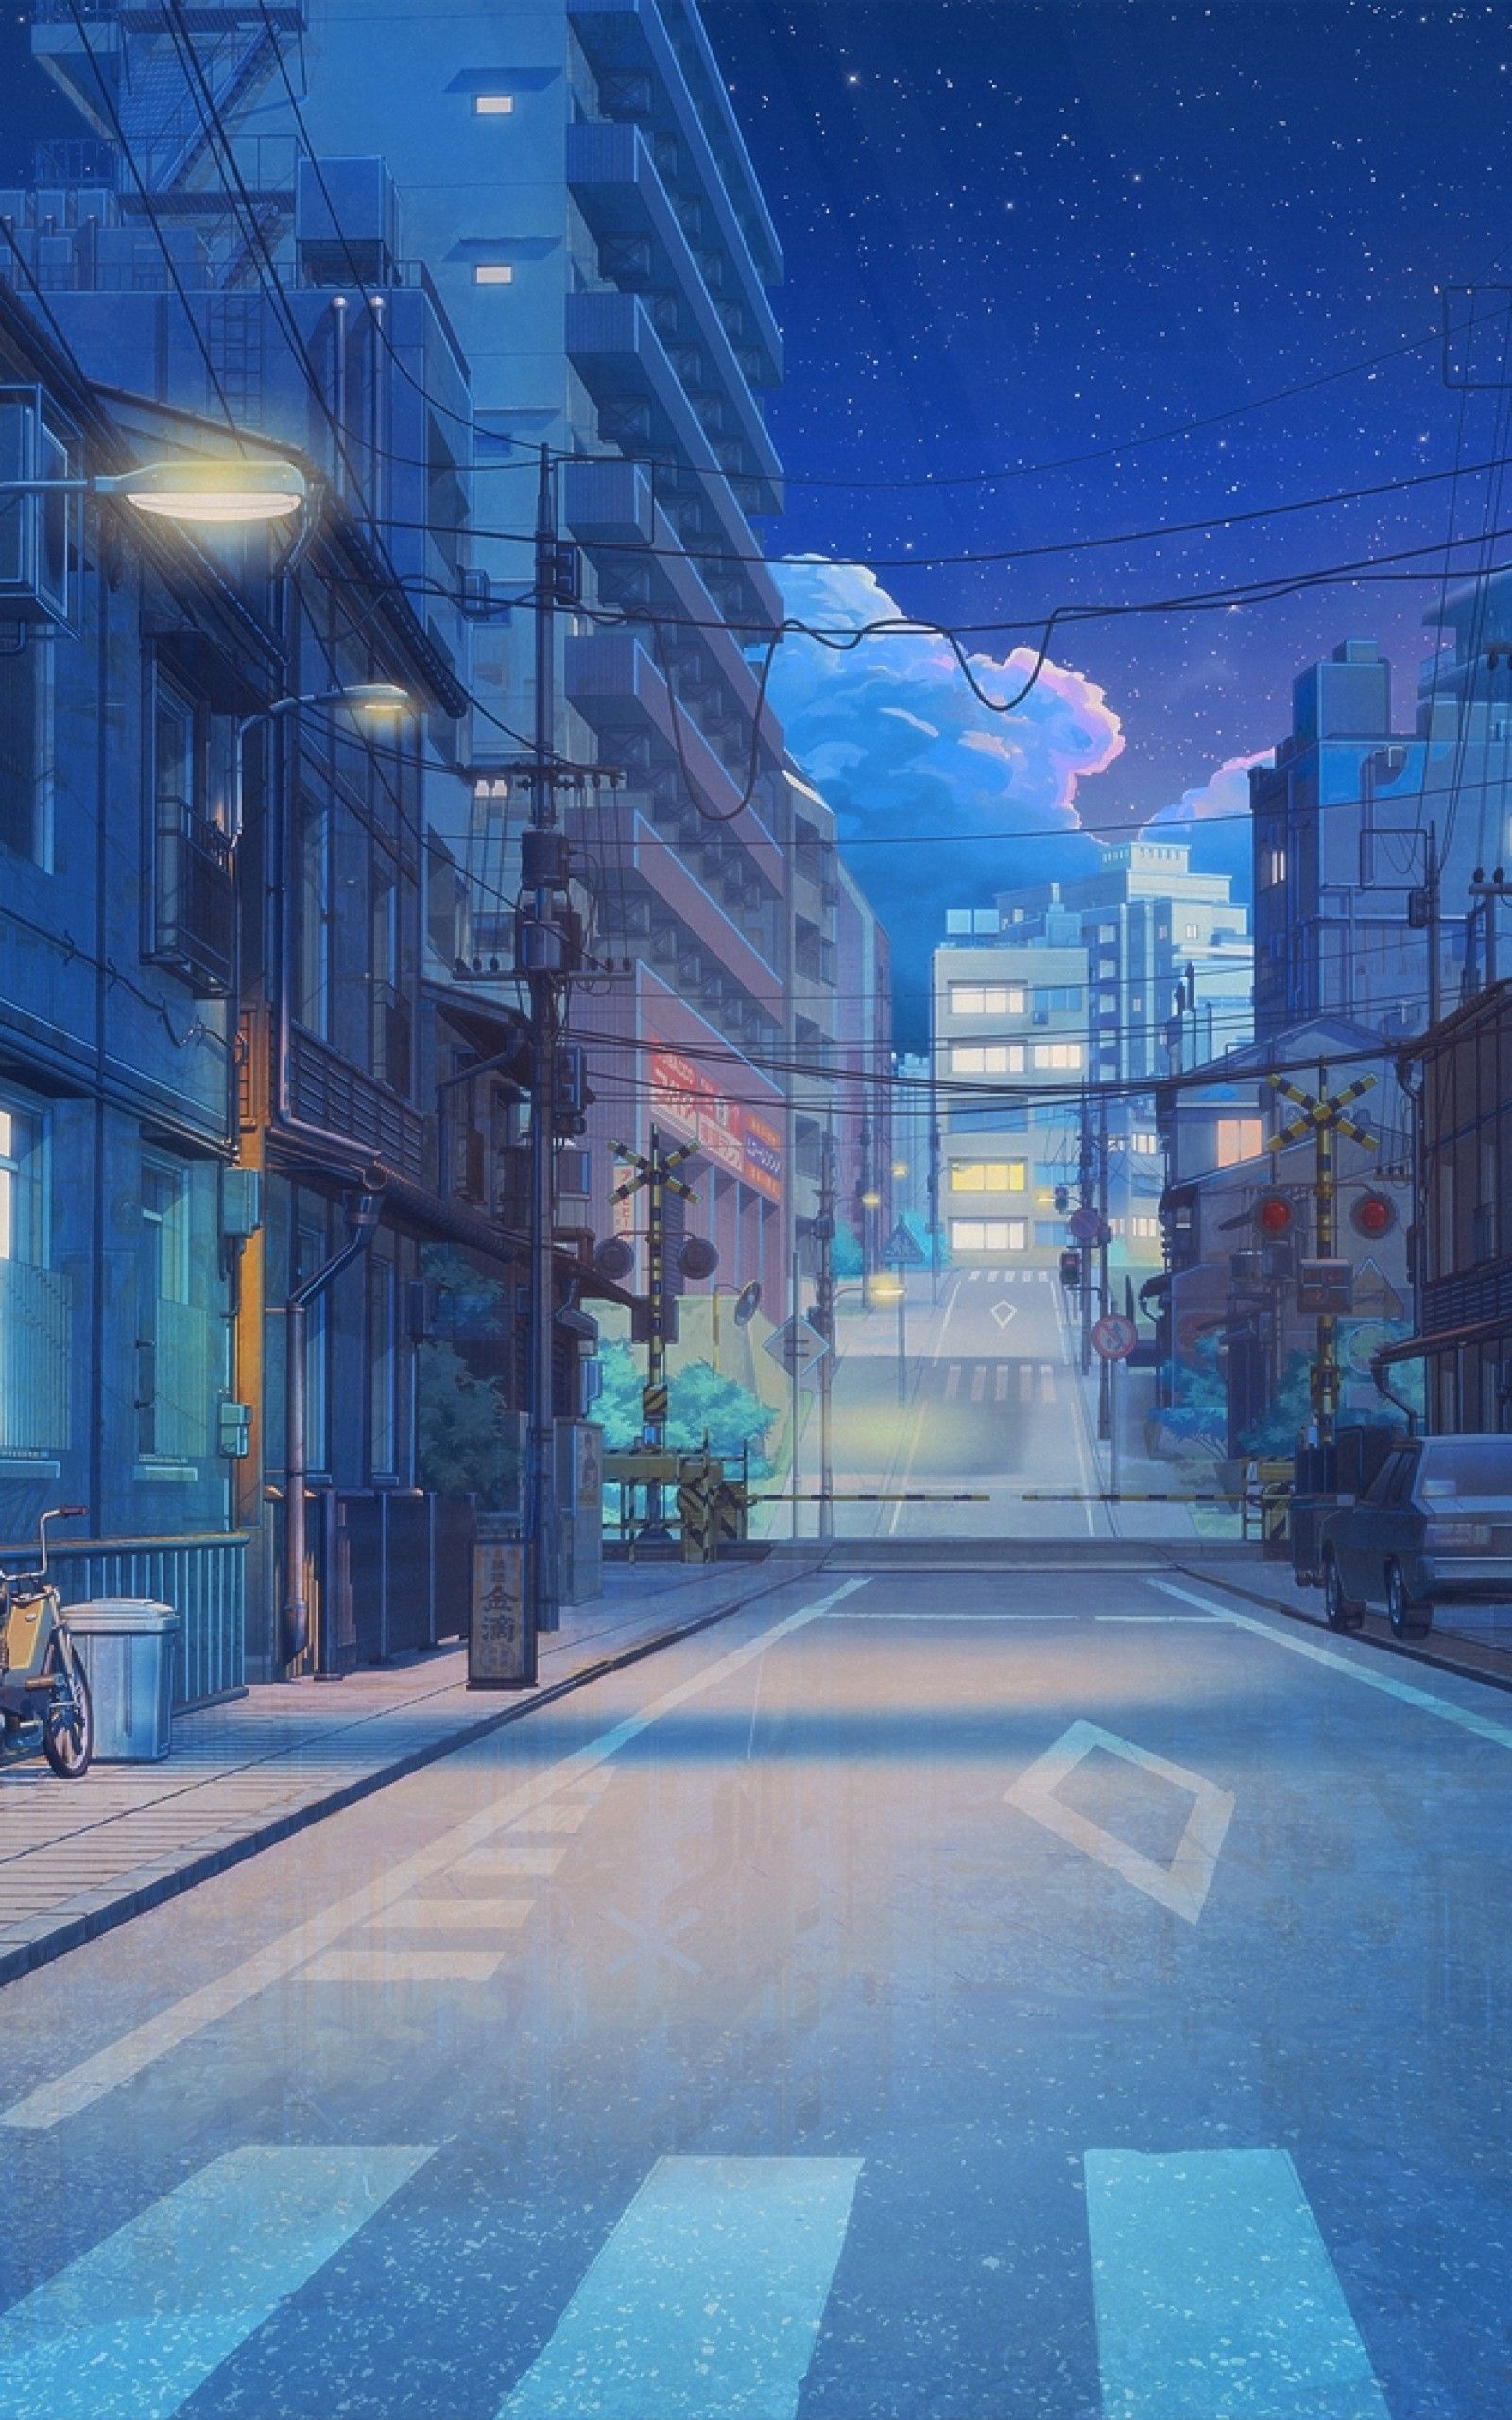 Anime Street Night Wallpapers - Wallpaper Cave